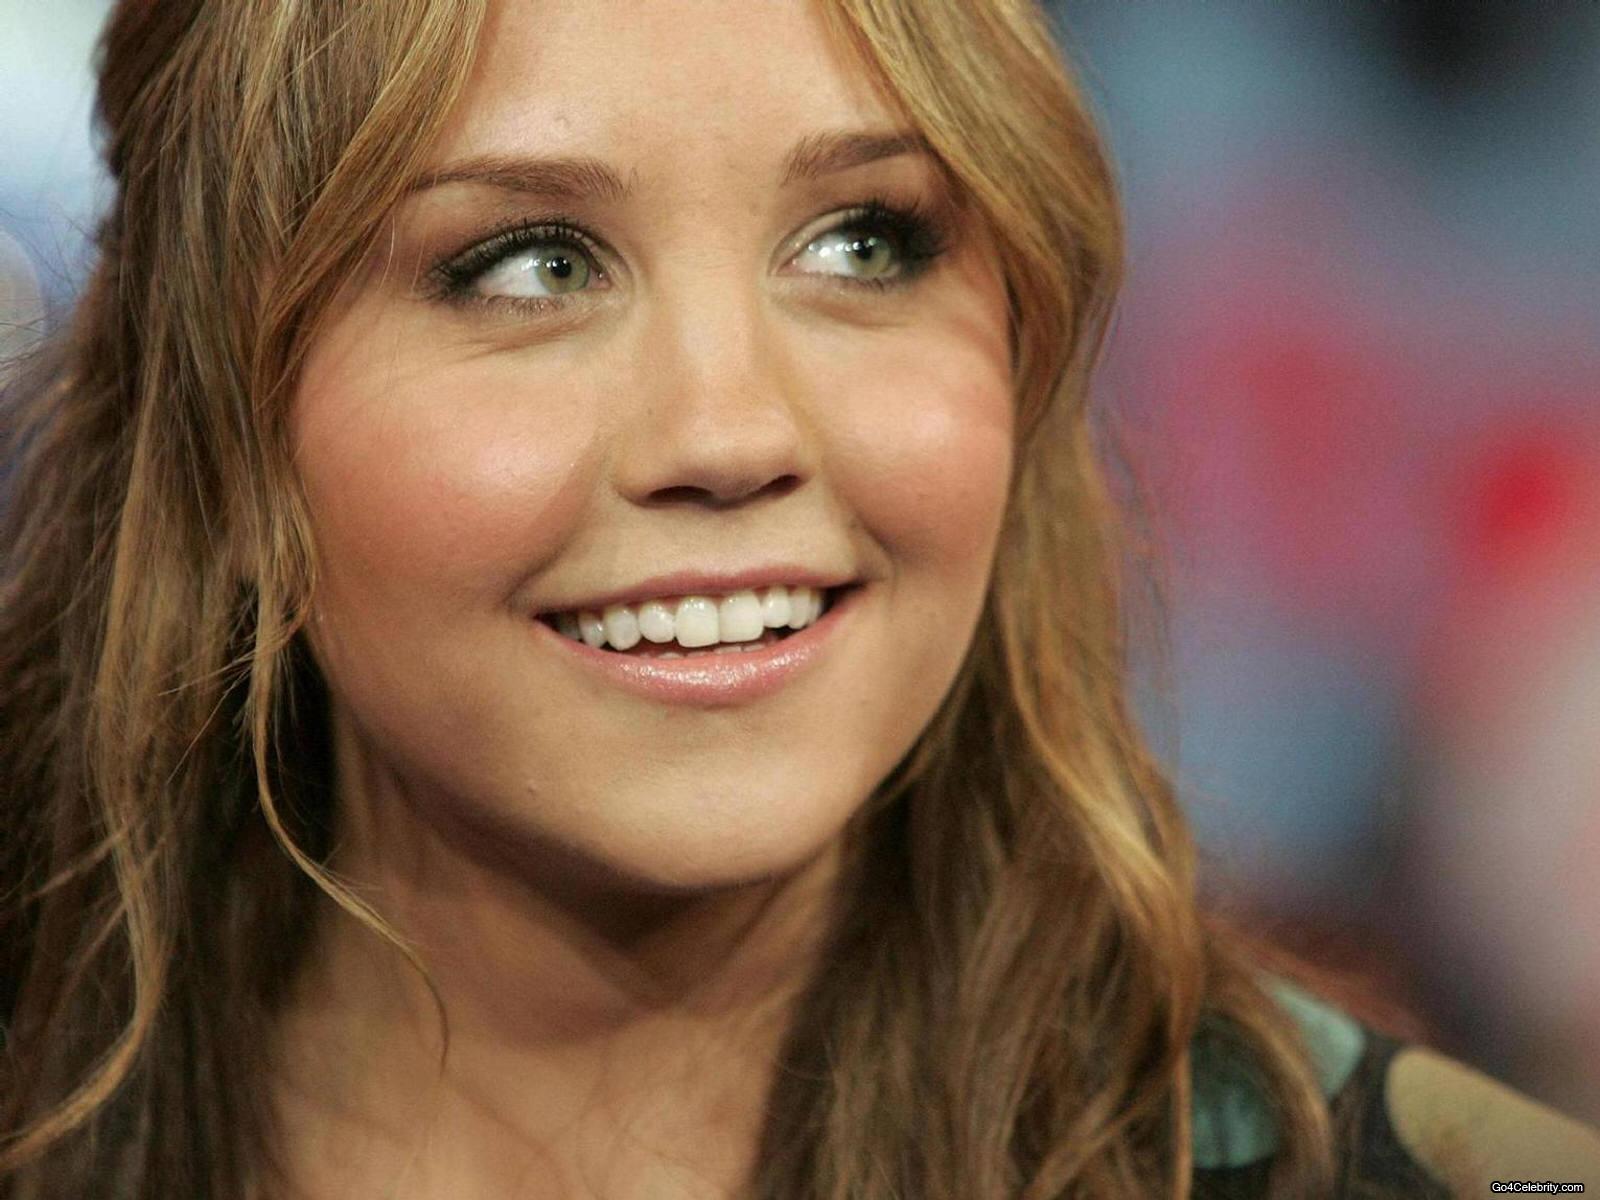 Geek insider, geekinsider, geekinsider. Com,, amanda bynes hit with new dui charge, entertainment